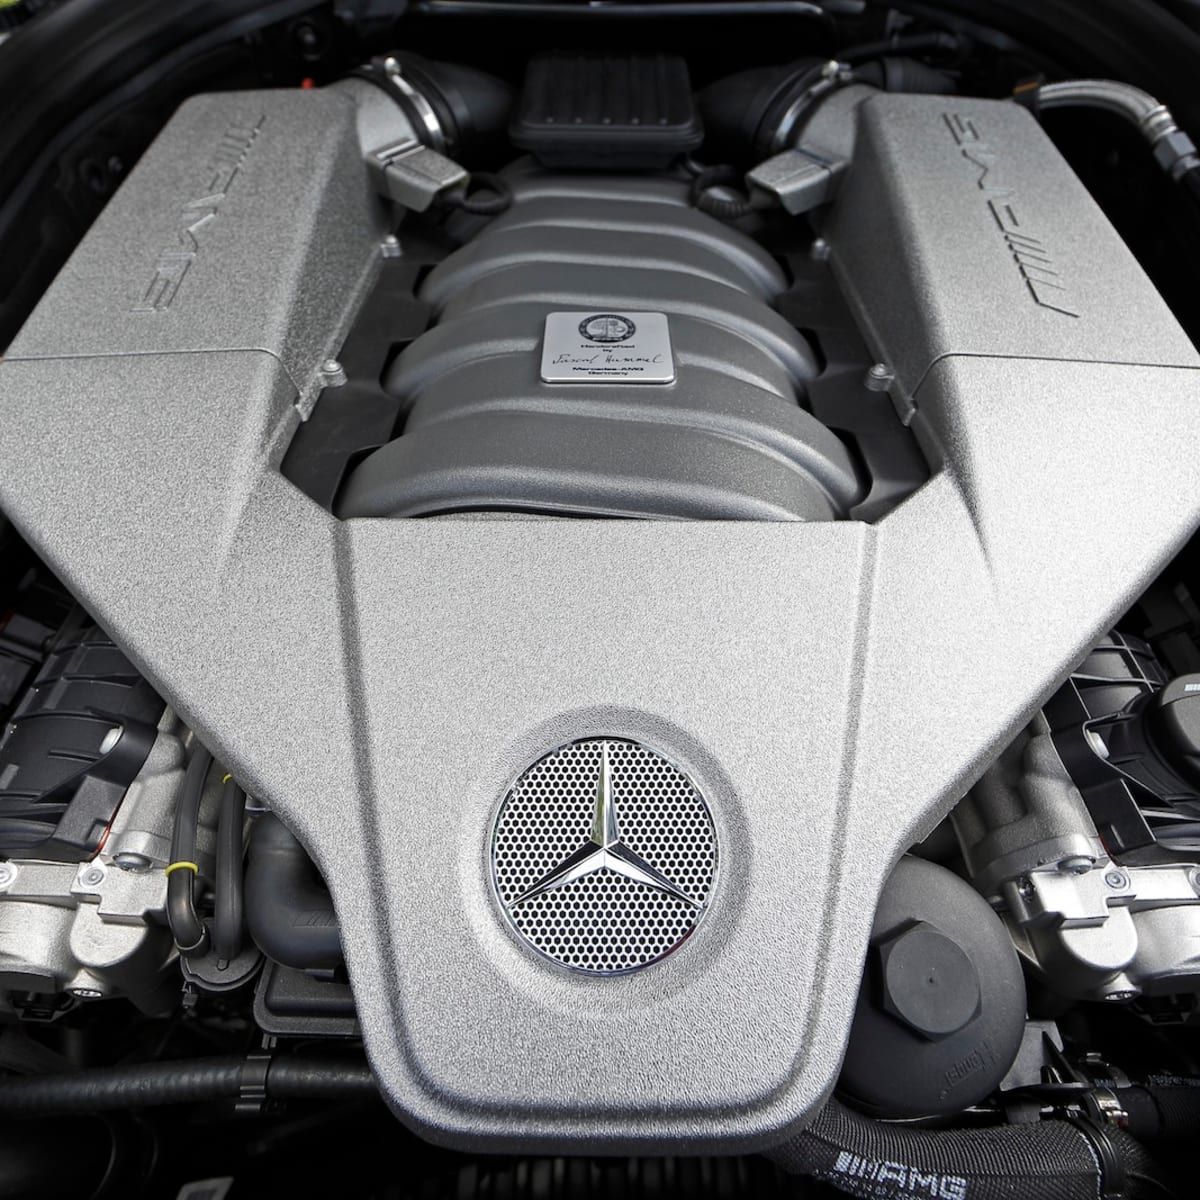 Mercedes Benz C63 Amg 4 0 Litre Twin Turbo V8 Confirmed For Flagship Caradvice